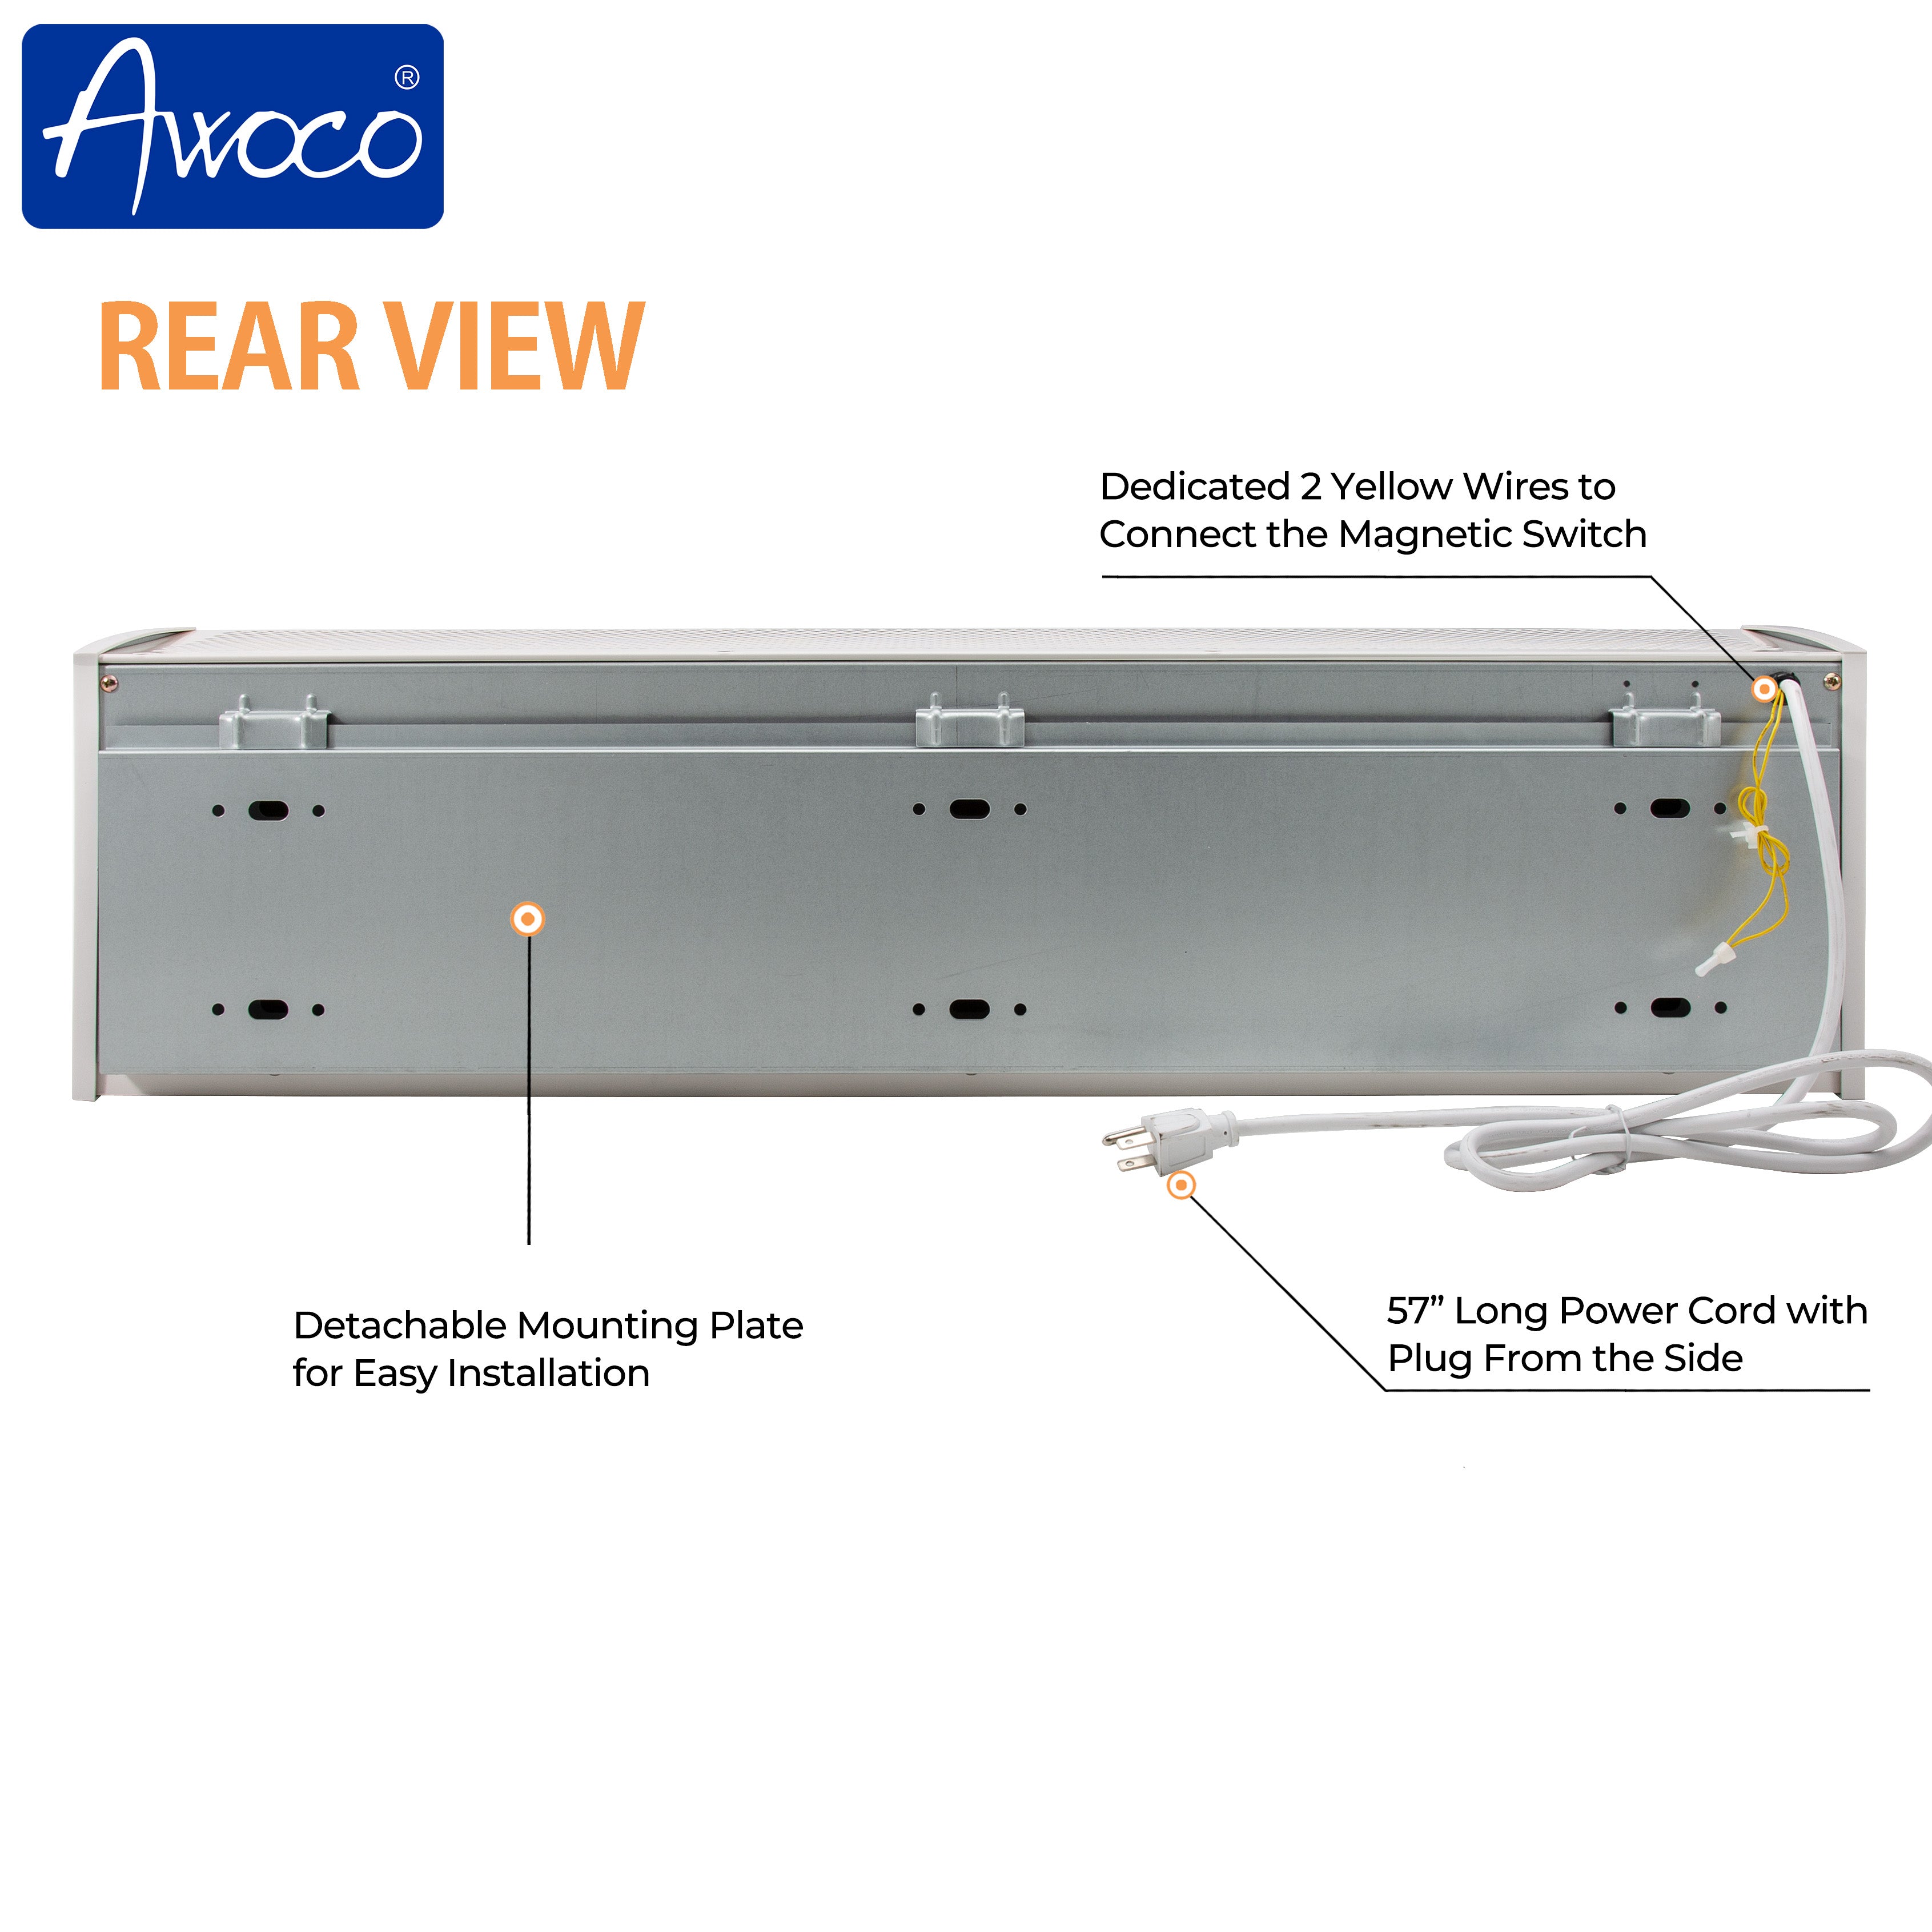 Awoco 42" Elegant 2 Speeds 1000 CFM Air Curtain, UL Certified, 120V Unheated with Magnetic Shutoff Delay Swing Doors